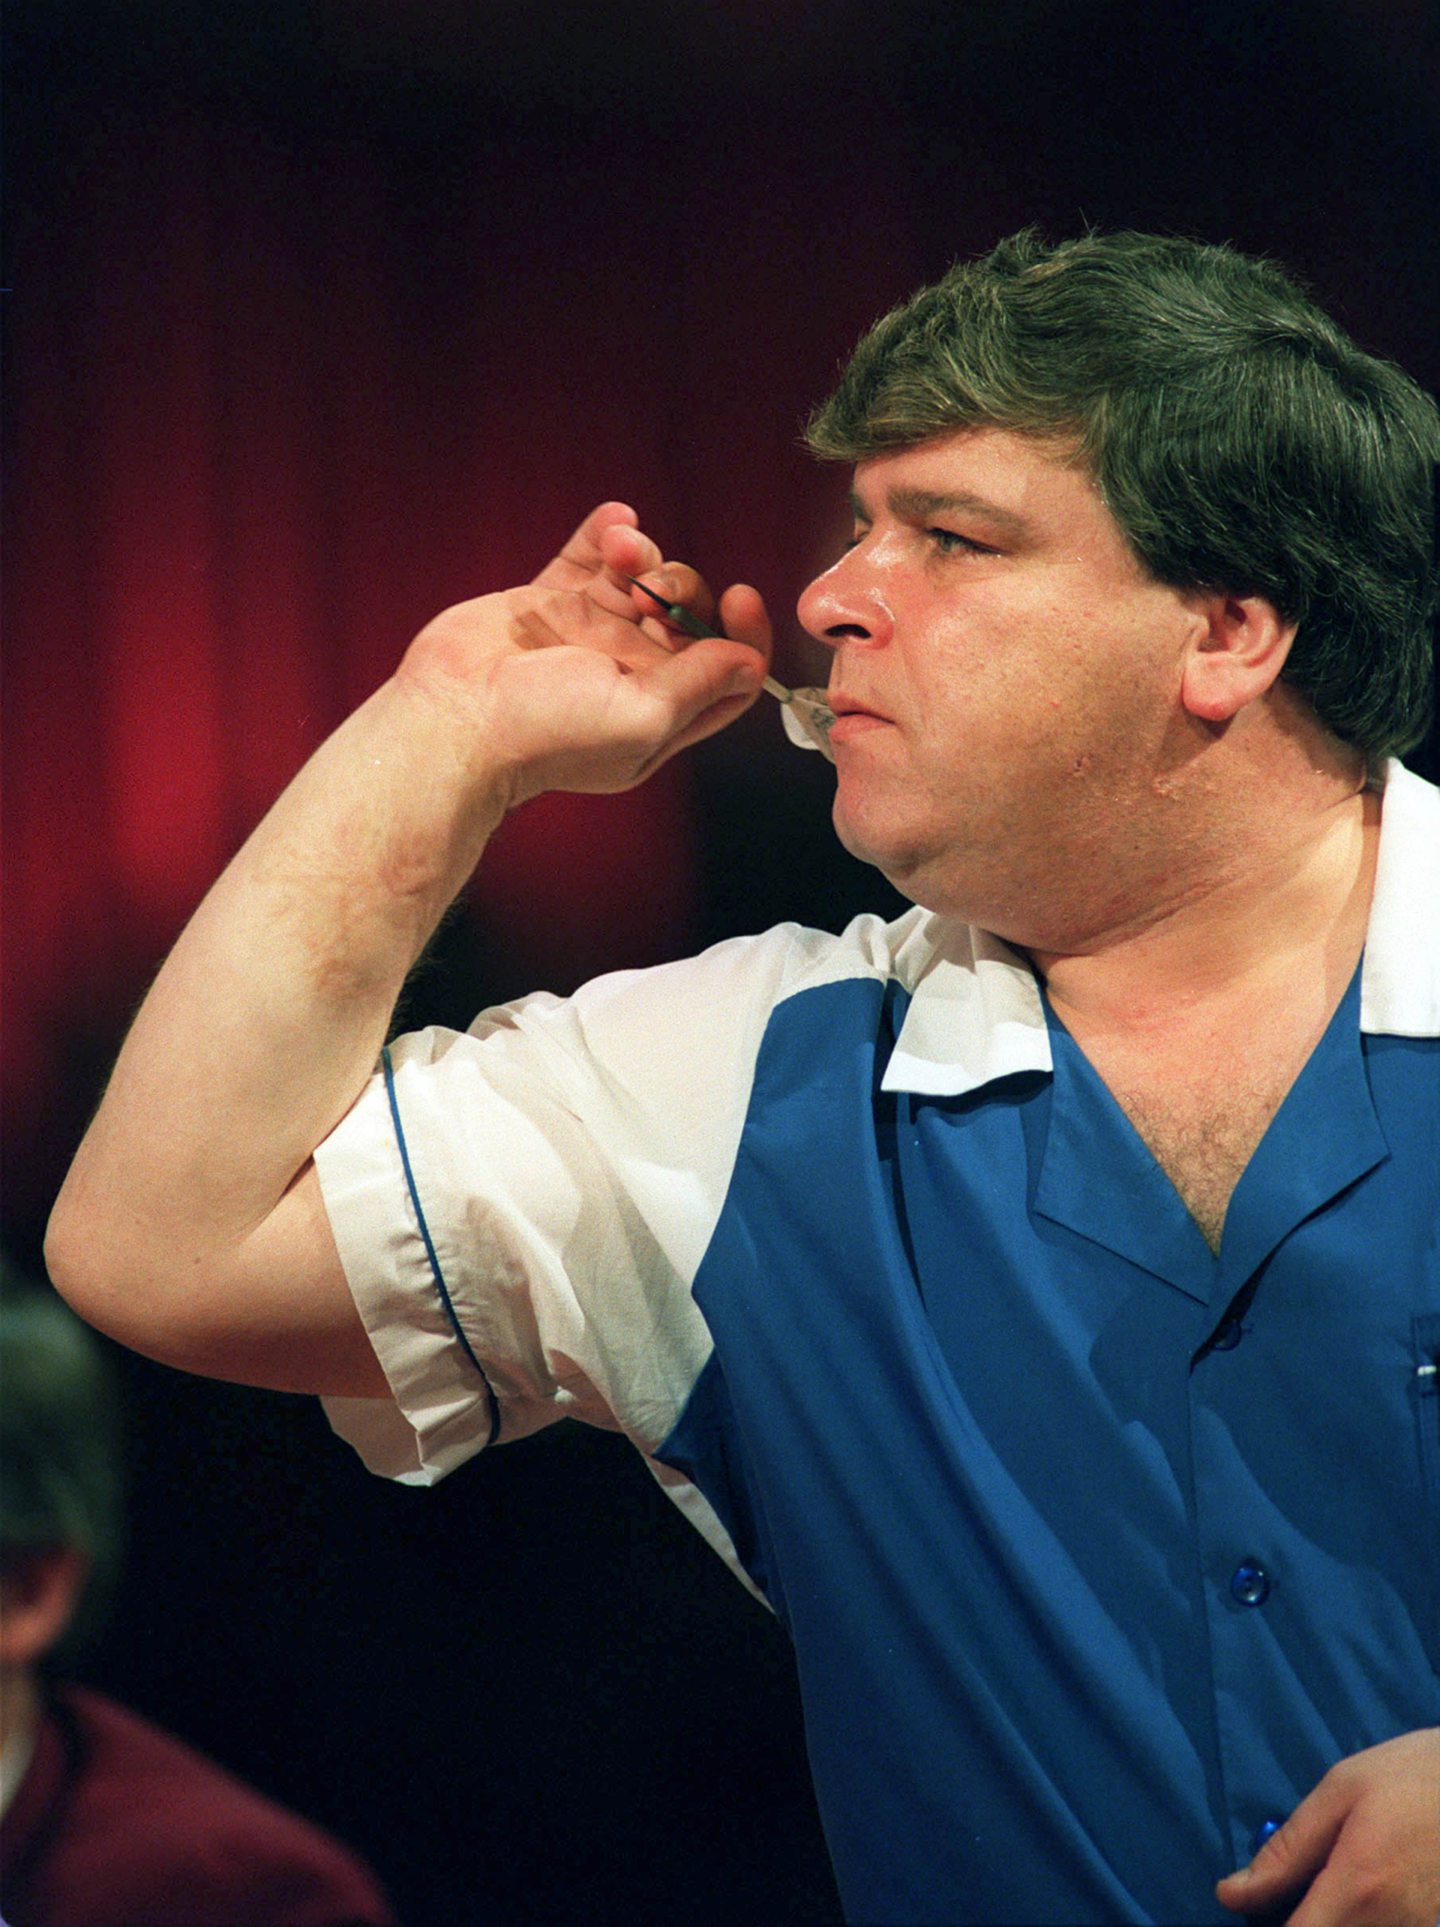 Jocky Wilson at the oche in blue and white shirt